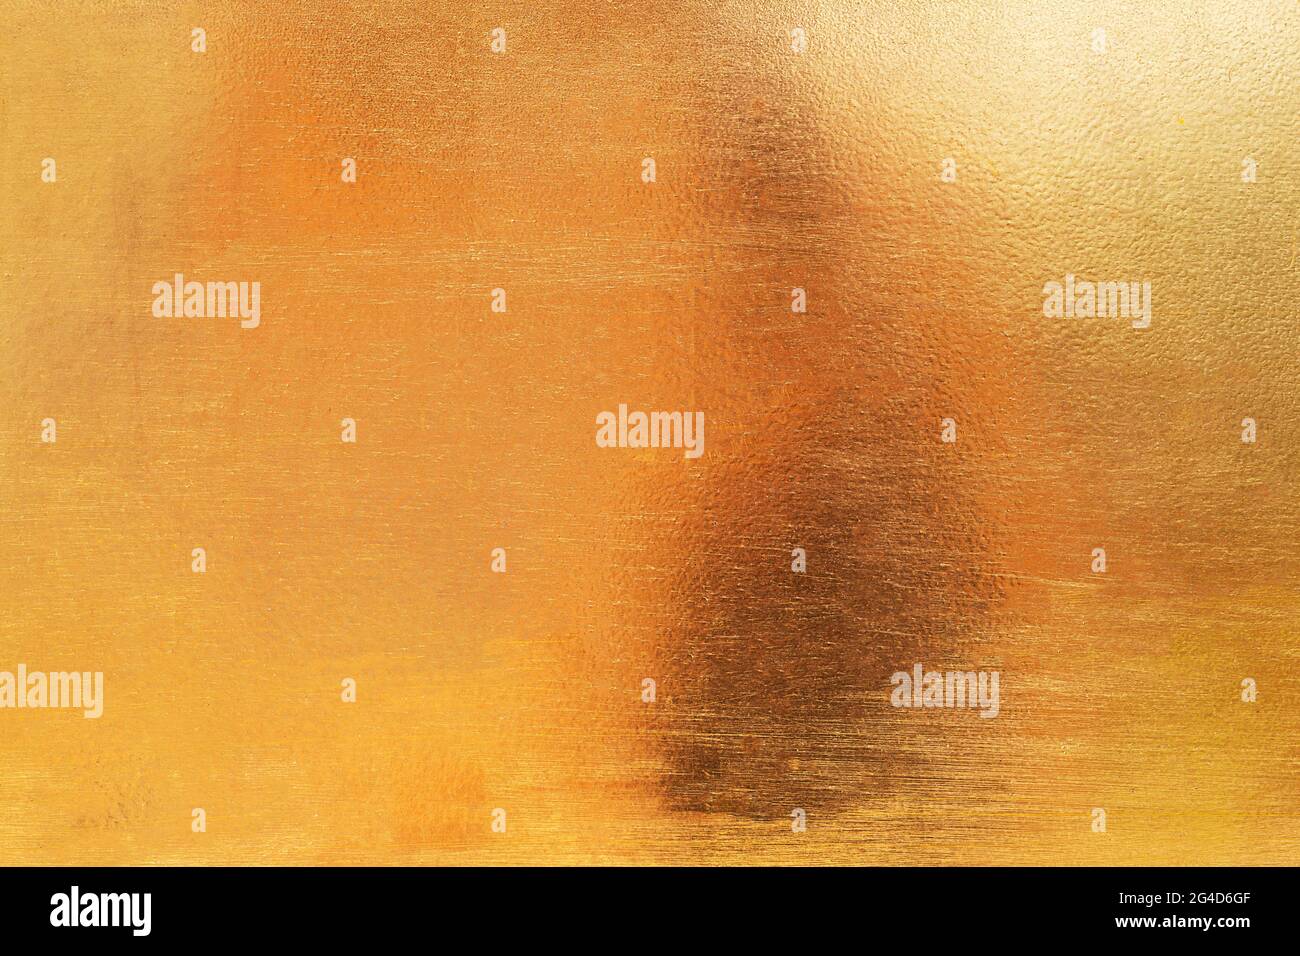 Gold abstract background or texture and gradients shadow horizontal shape Stock Photo